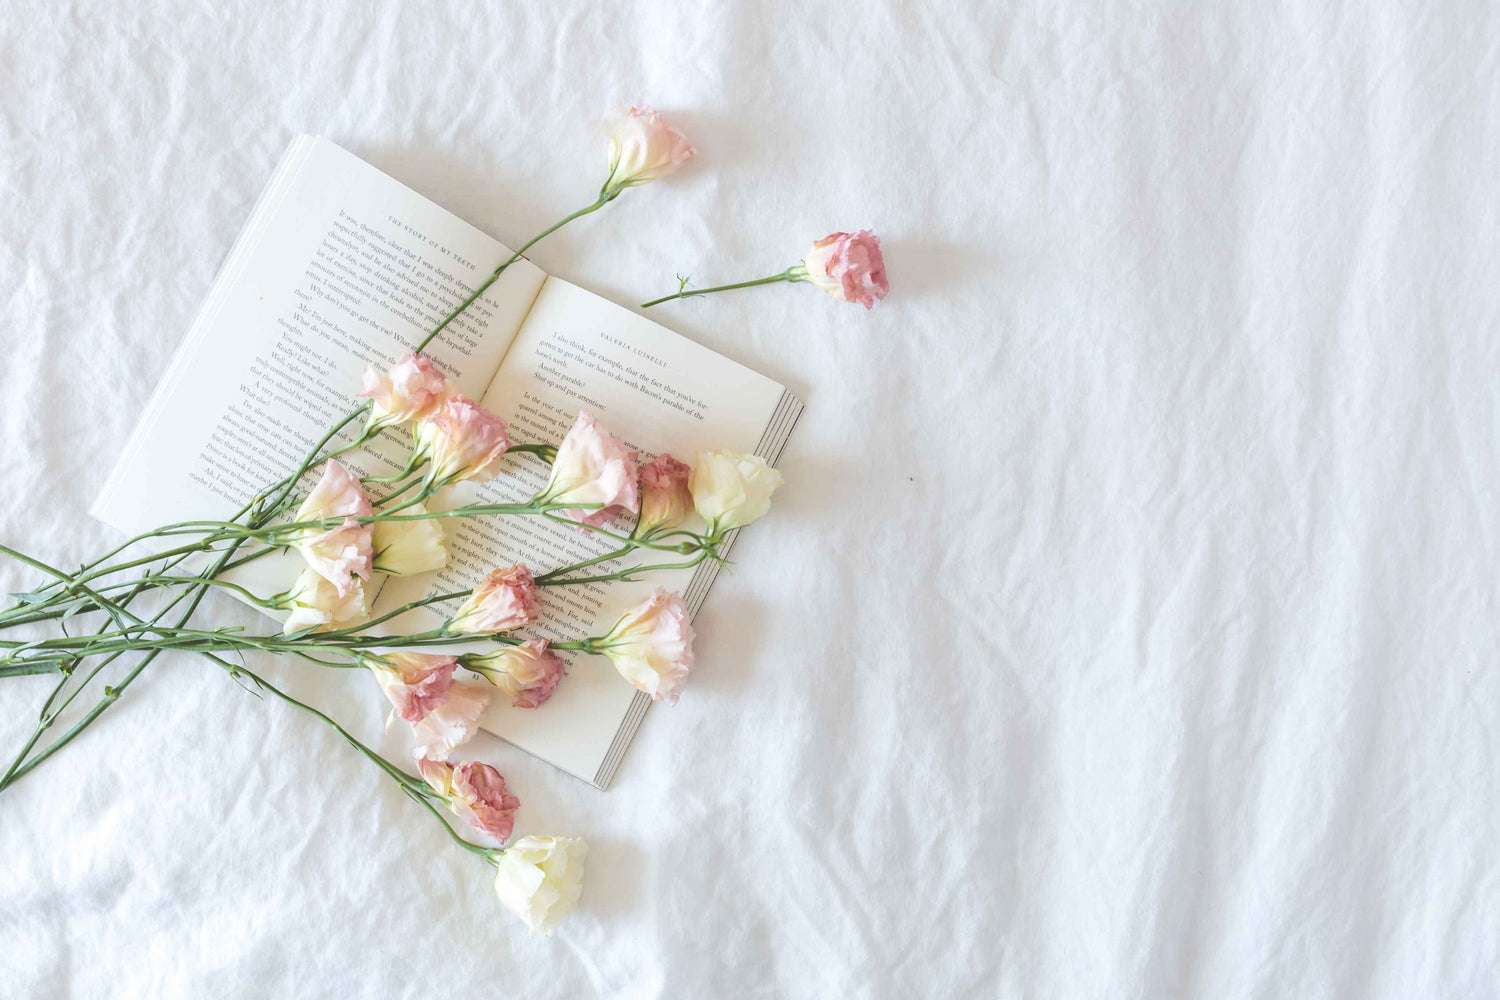 Statement of Practices image - A book with roses laid on it